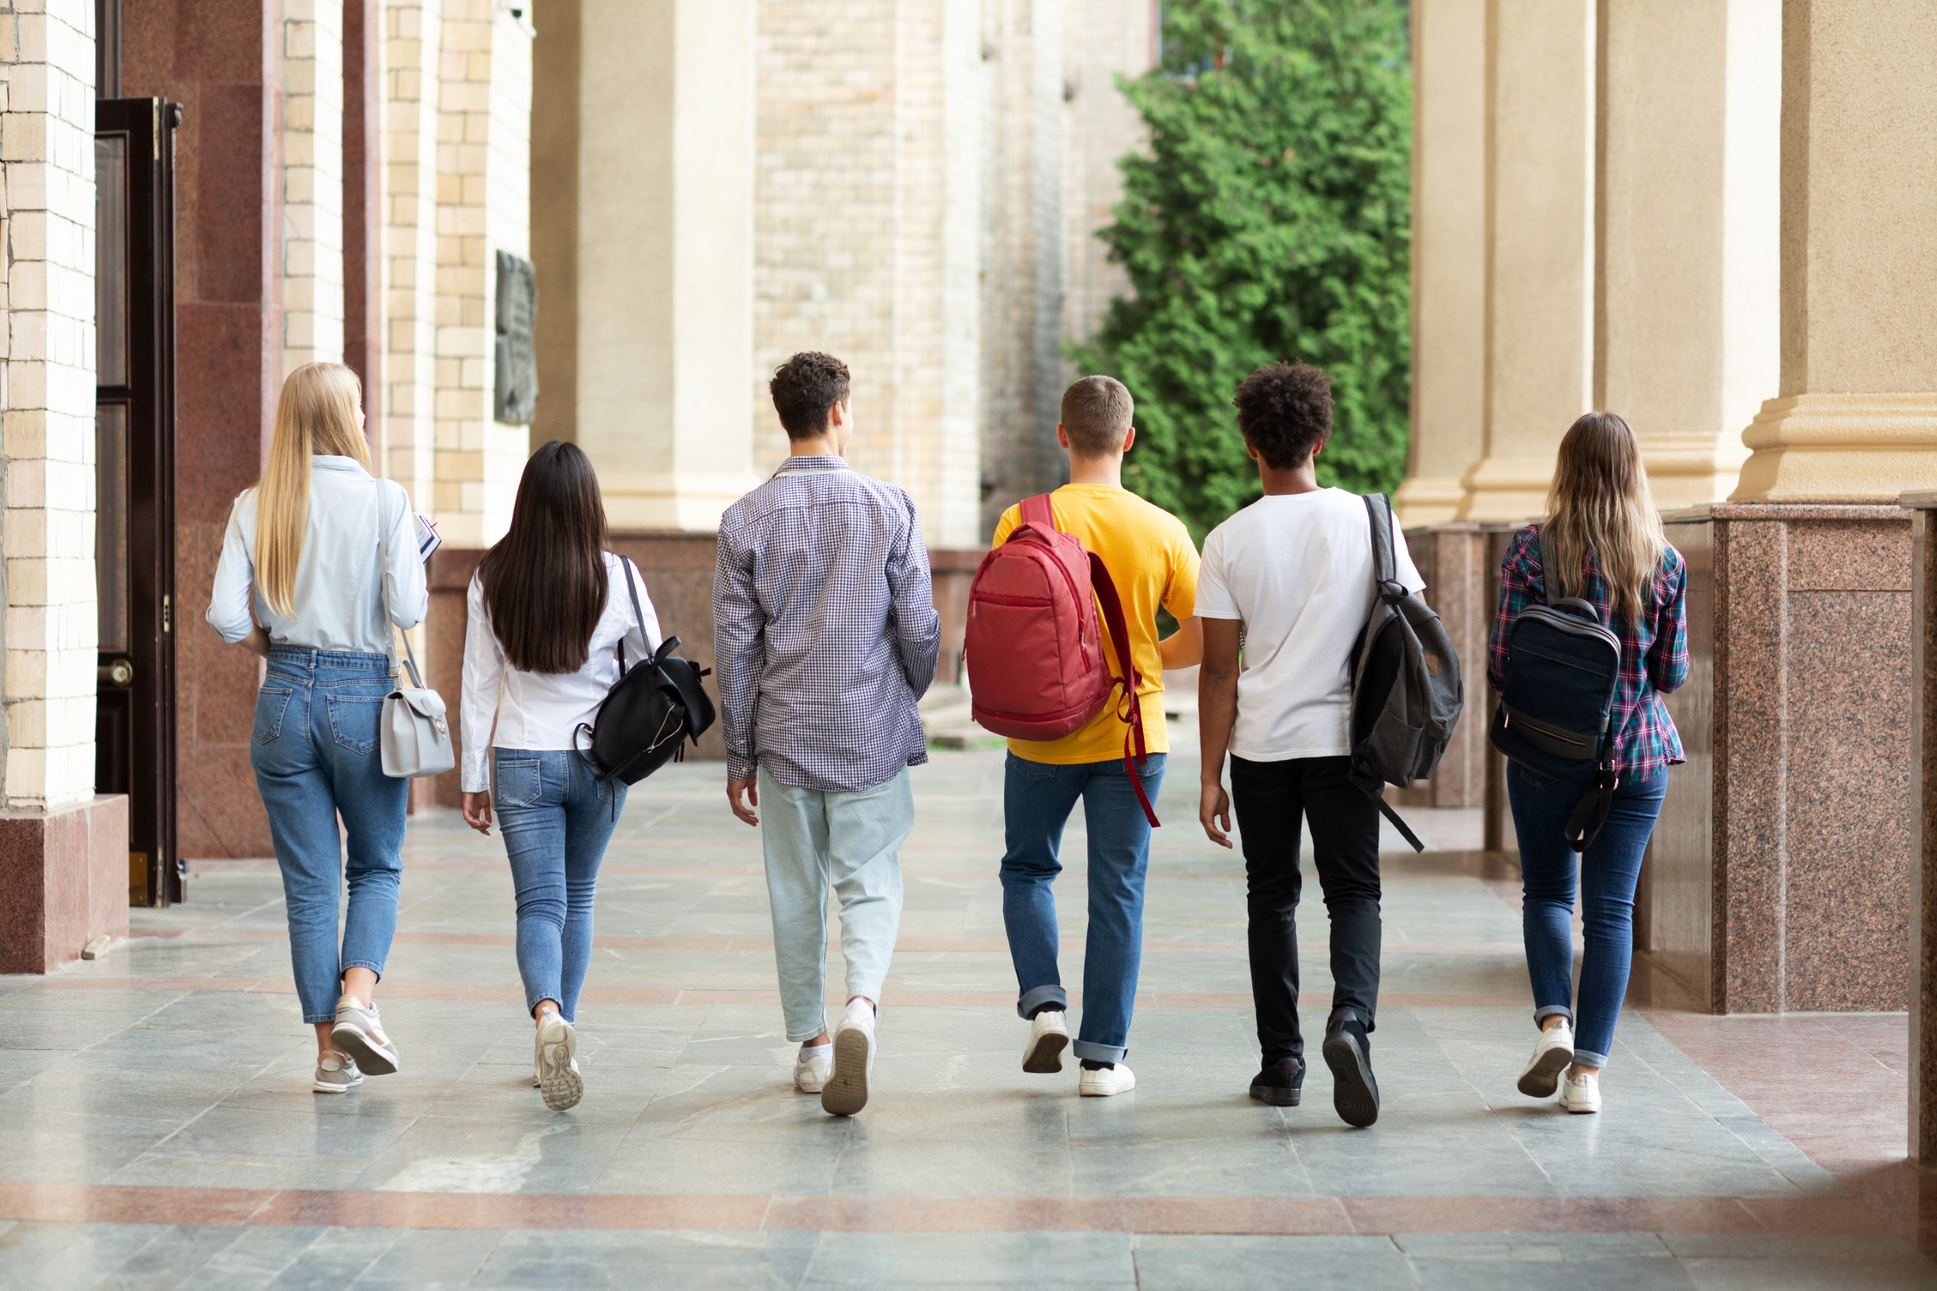 Group of students walking in college campus